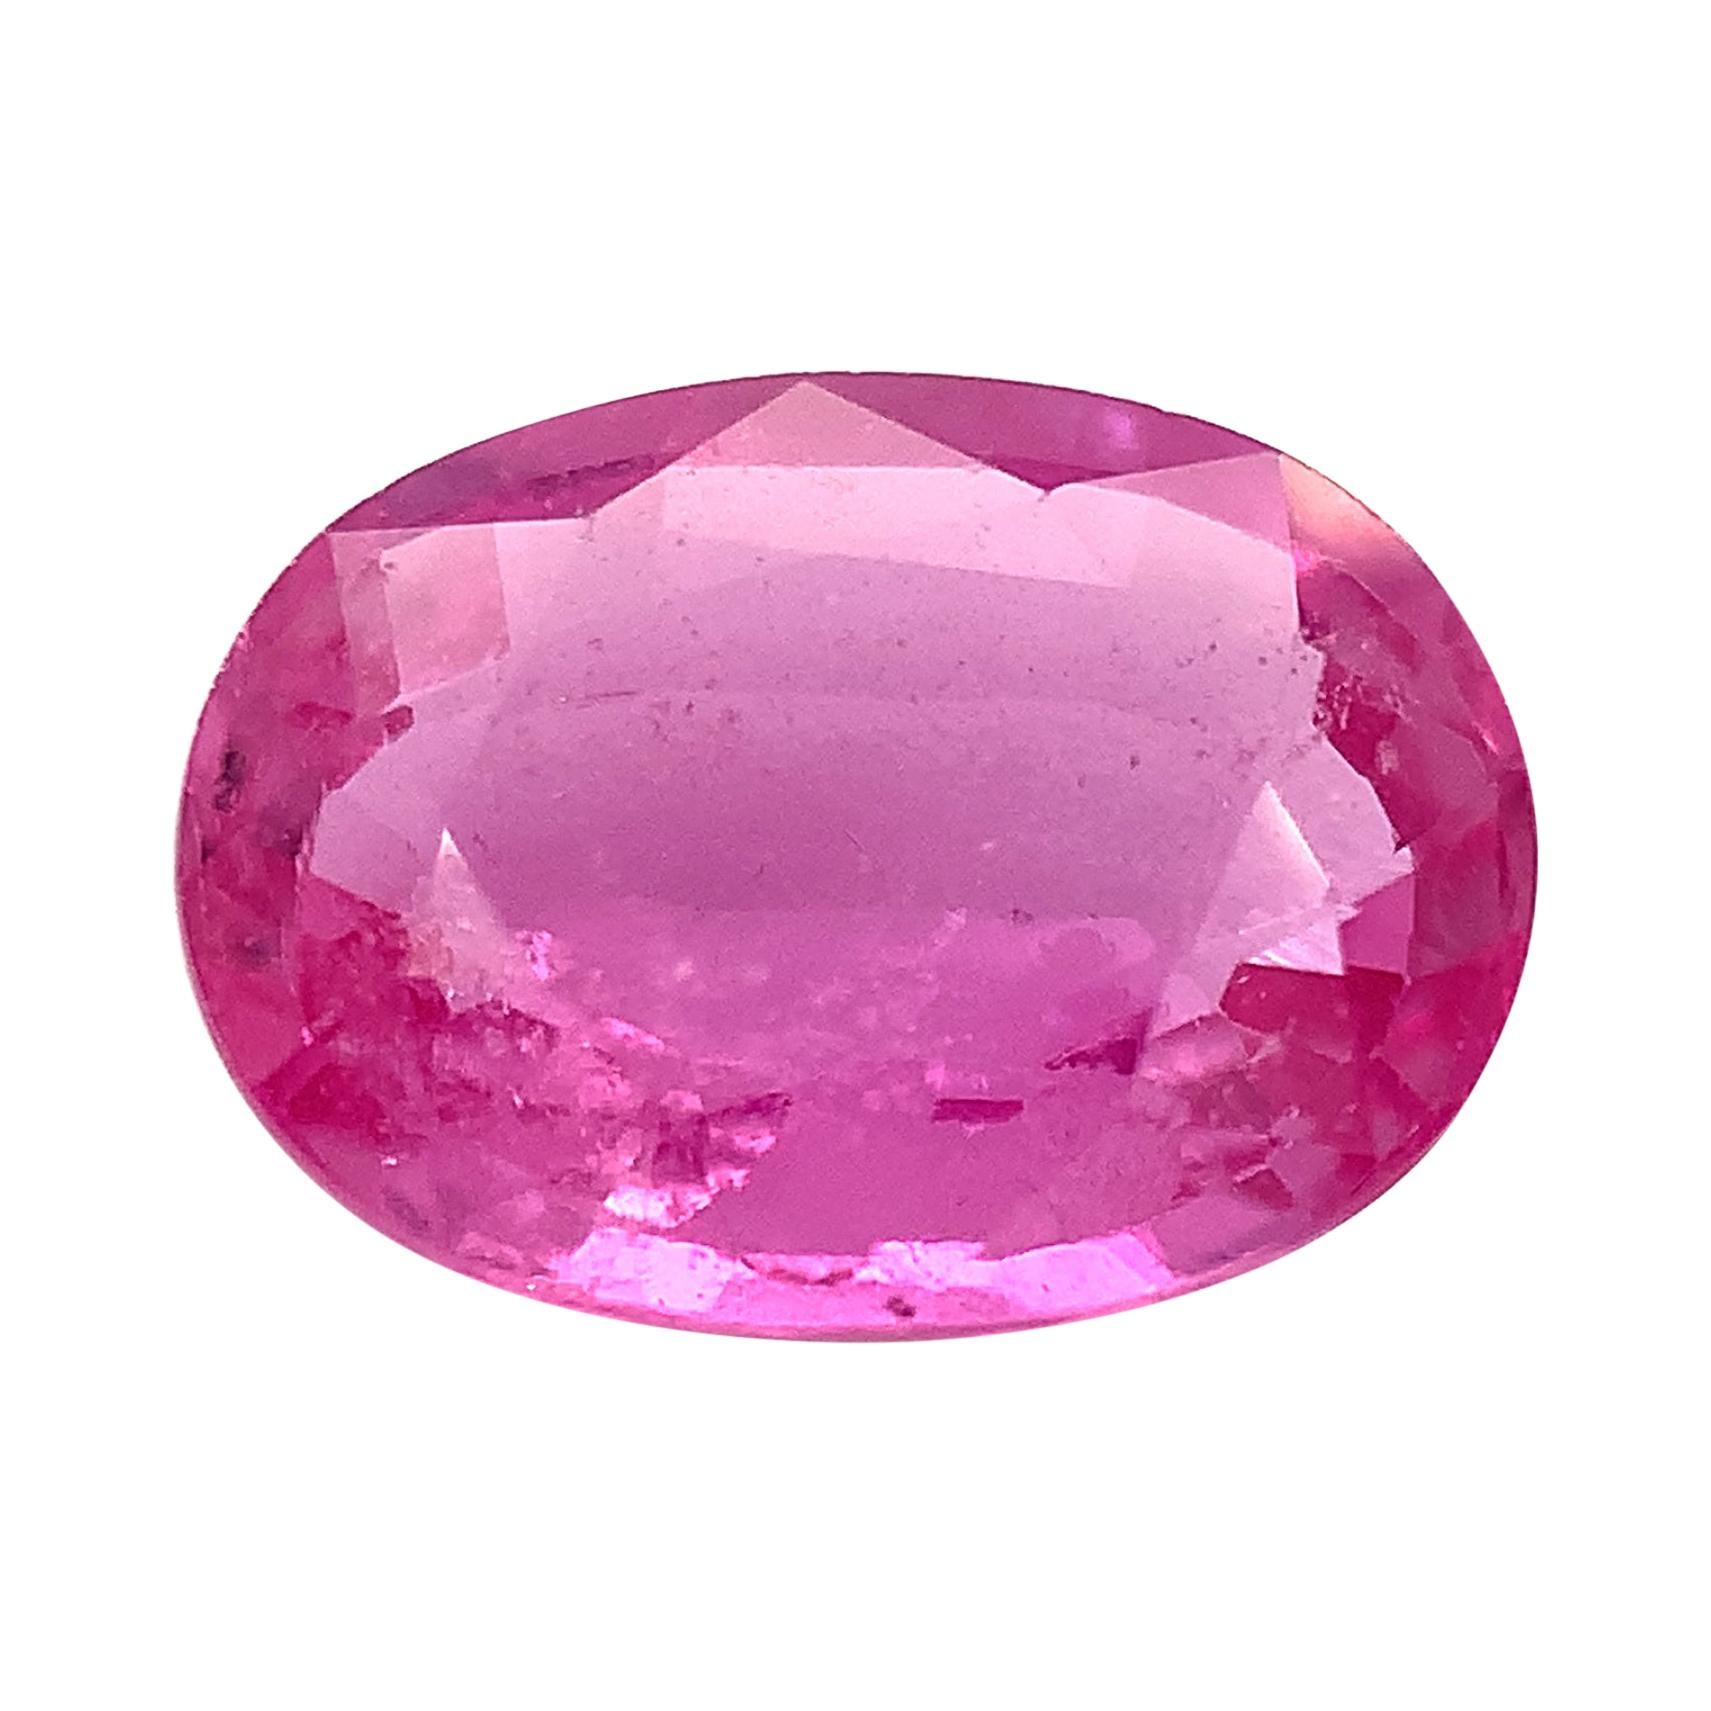 2.11 Carat Pink Sapphire Oval, Unset Loose Gemstone, GIA Certified   For Sale